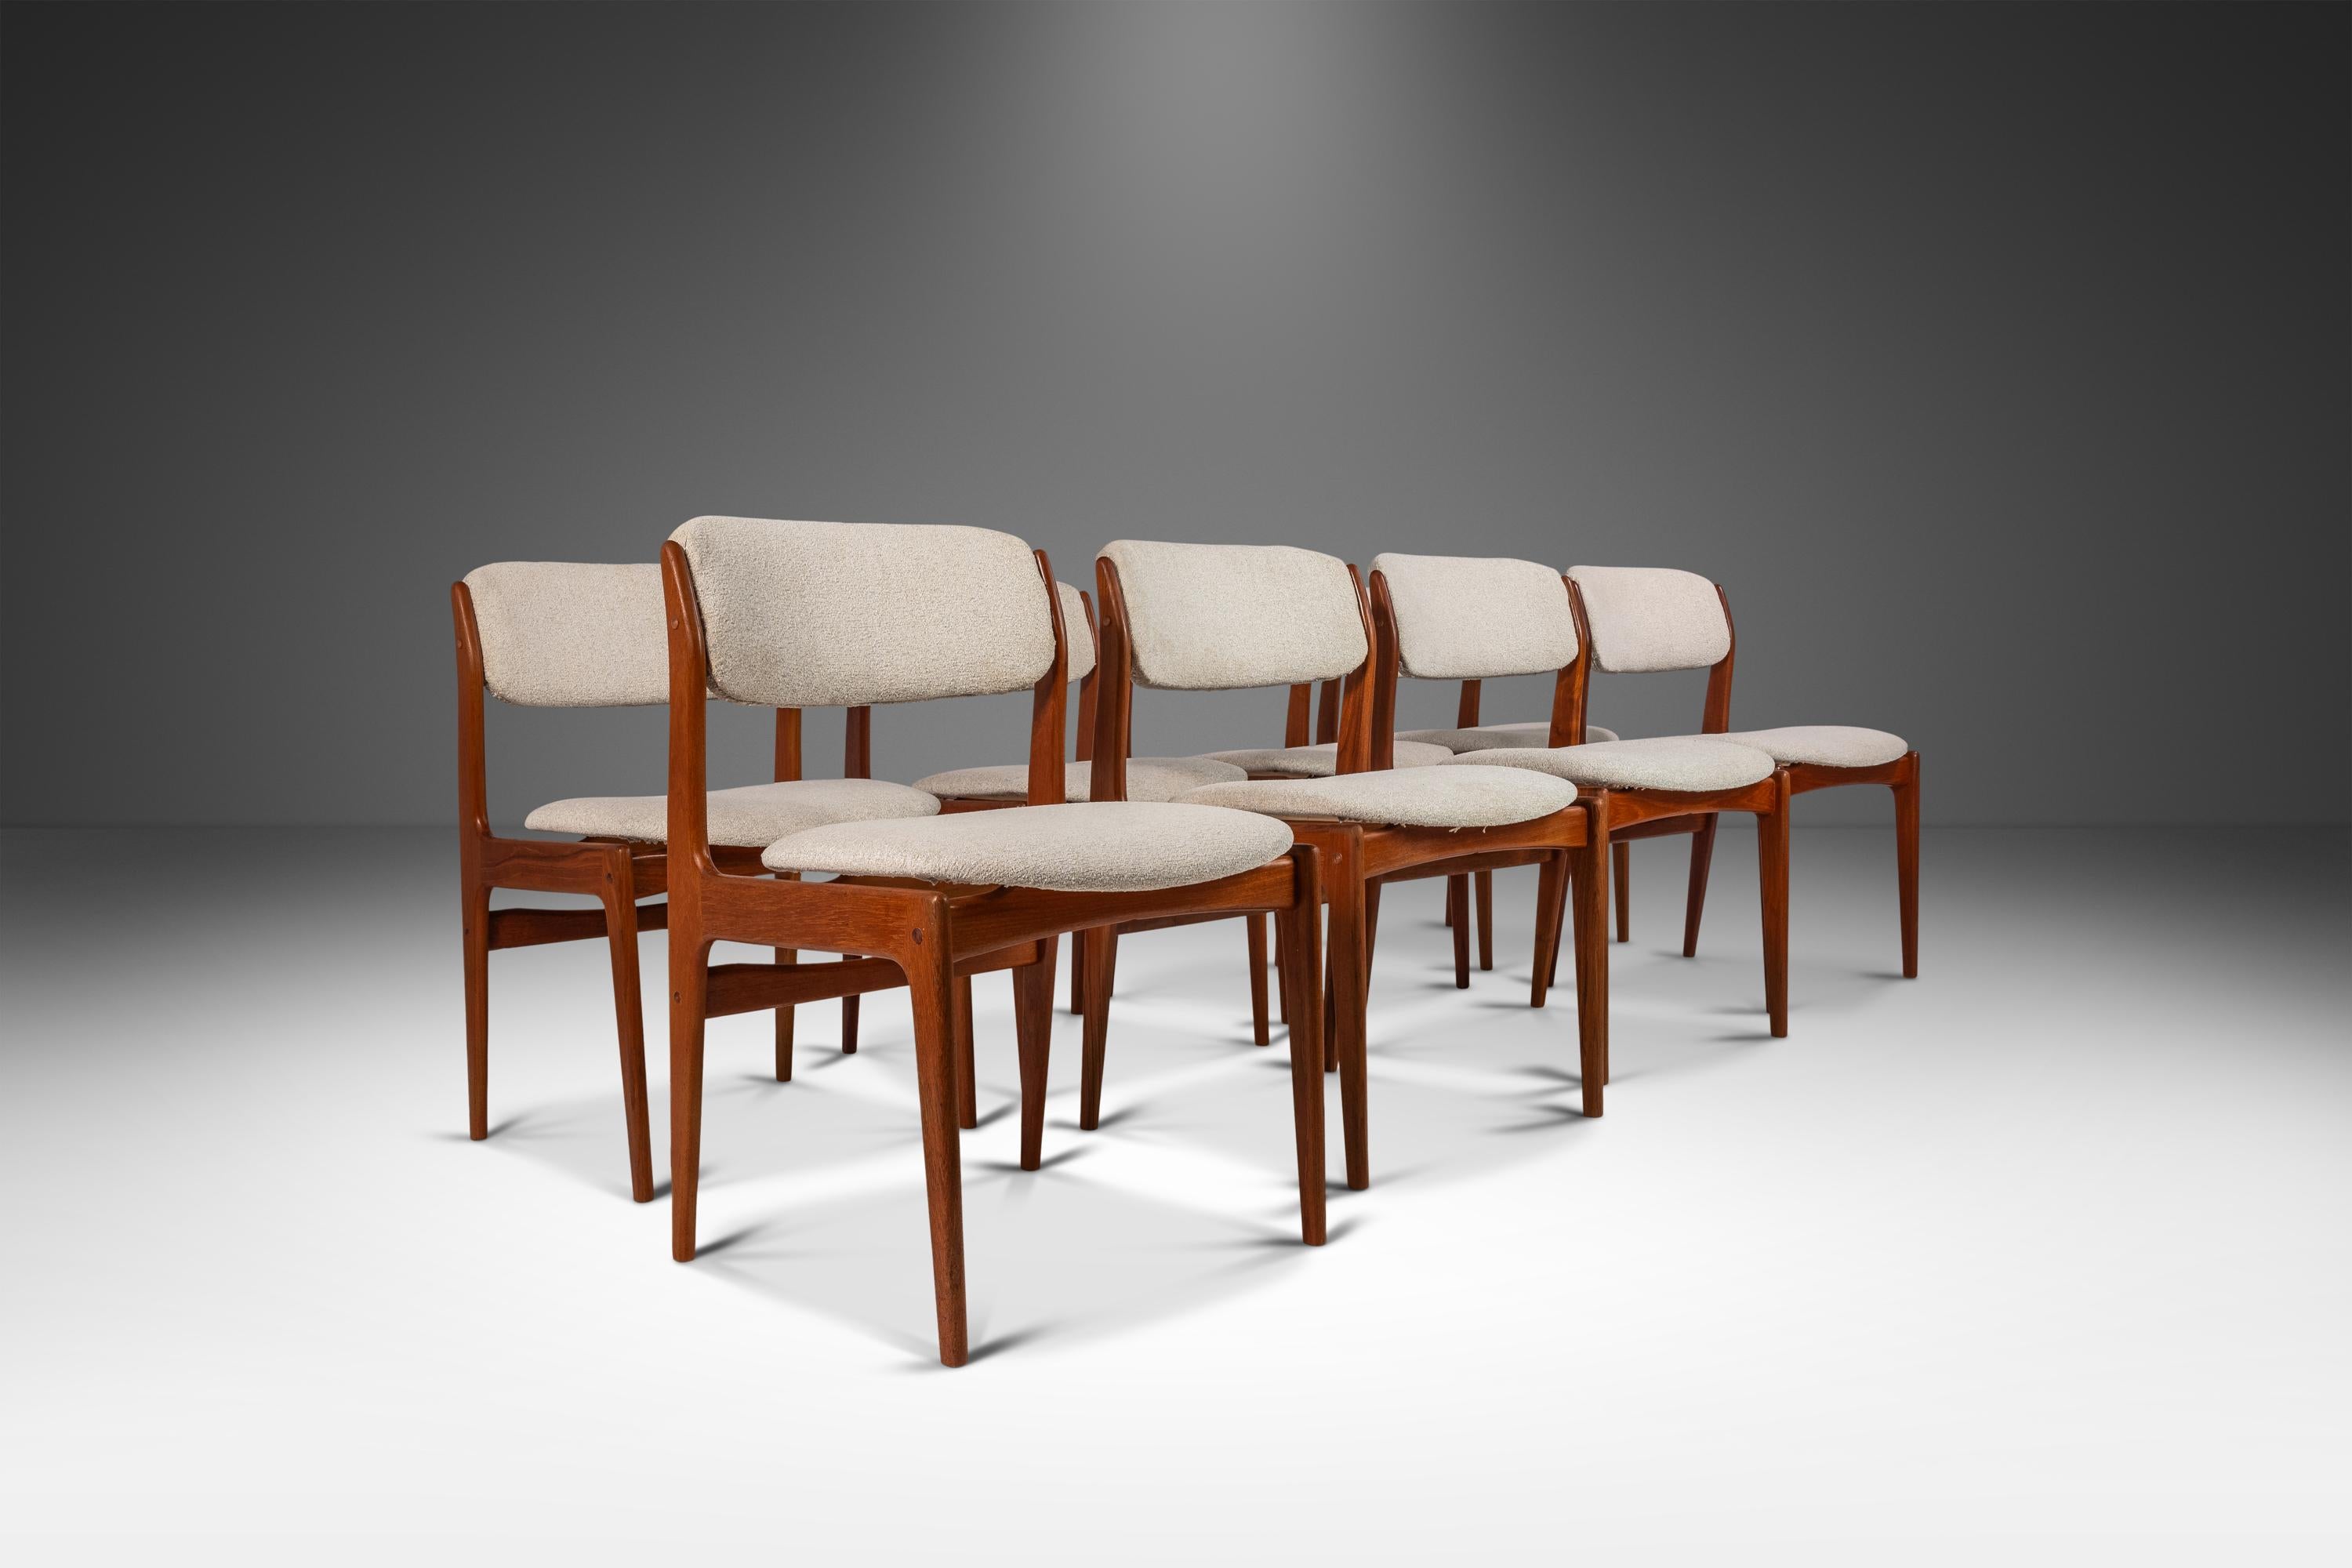 Set of Eight (8) Danish Modern Dining Chairs in Teak by Benny Linden, c. 1970's 3